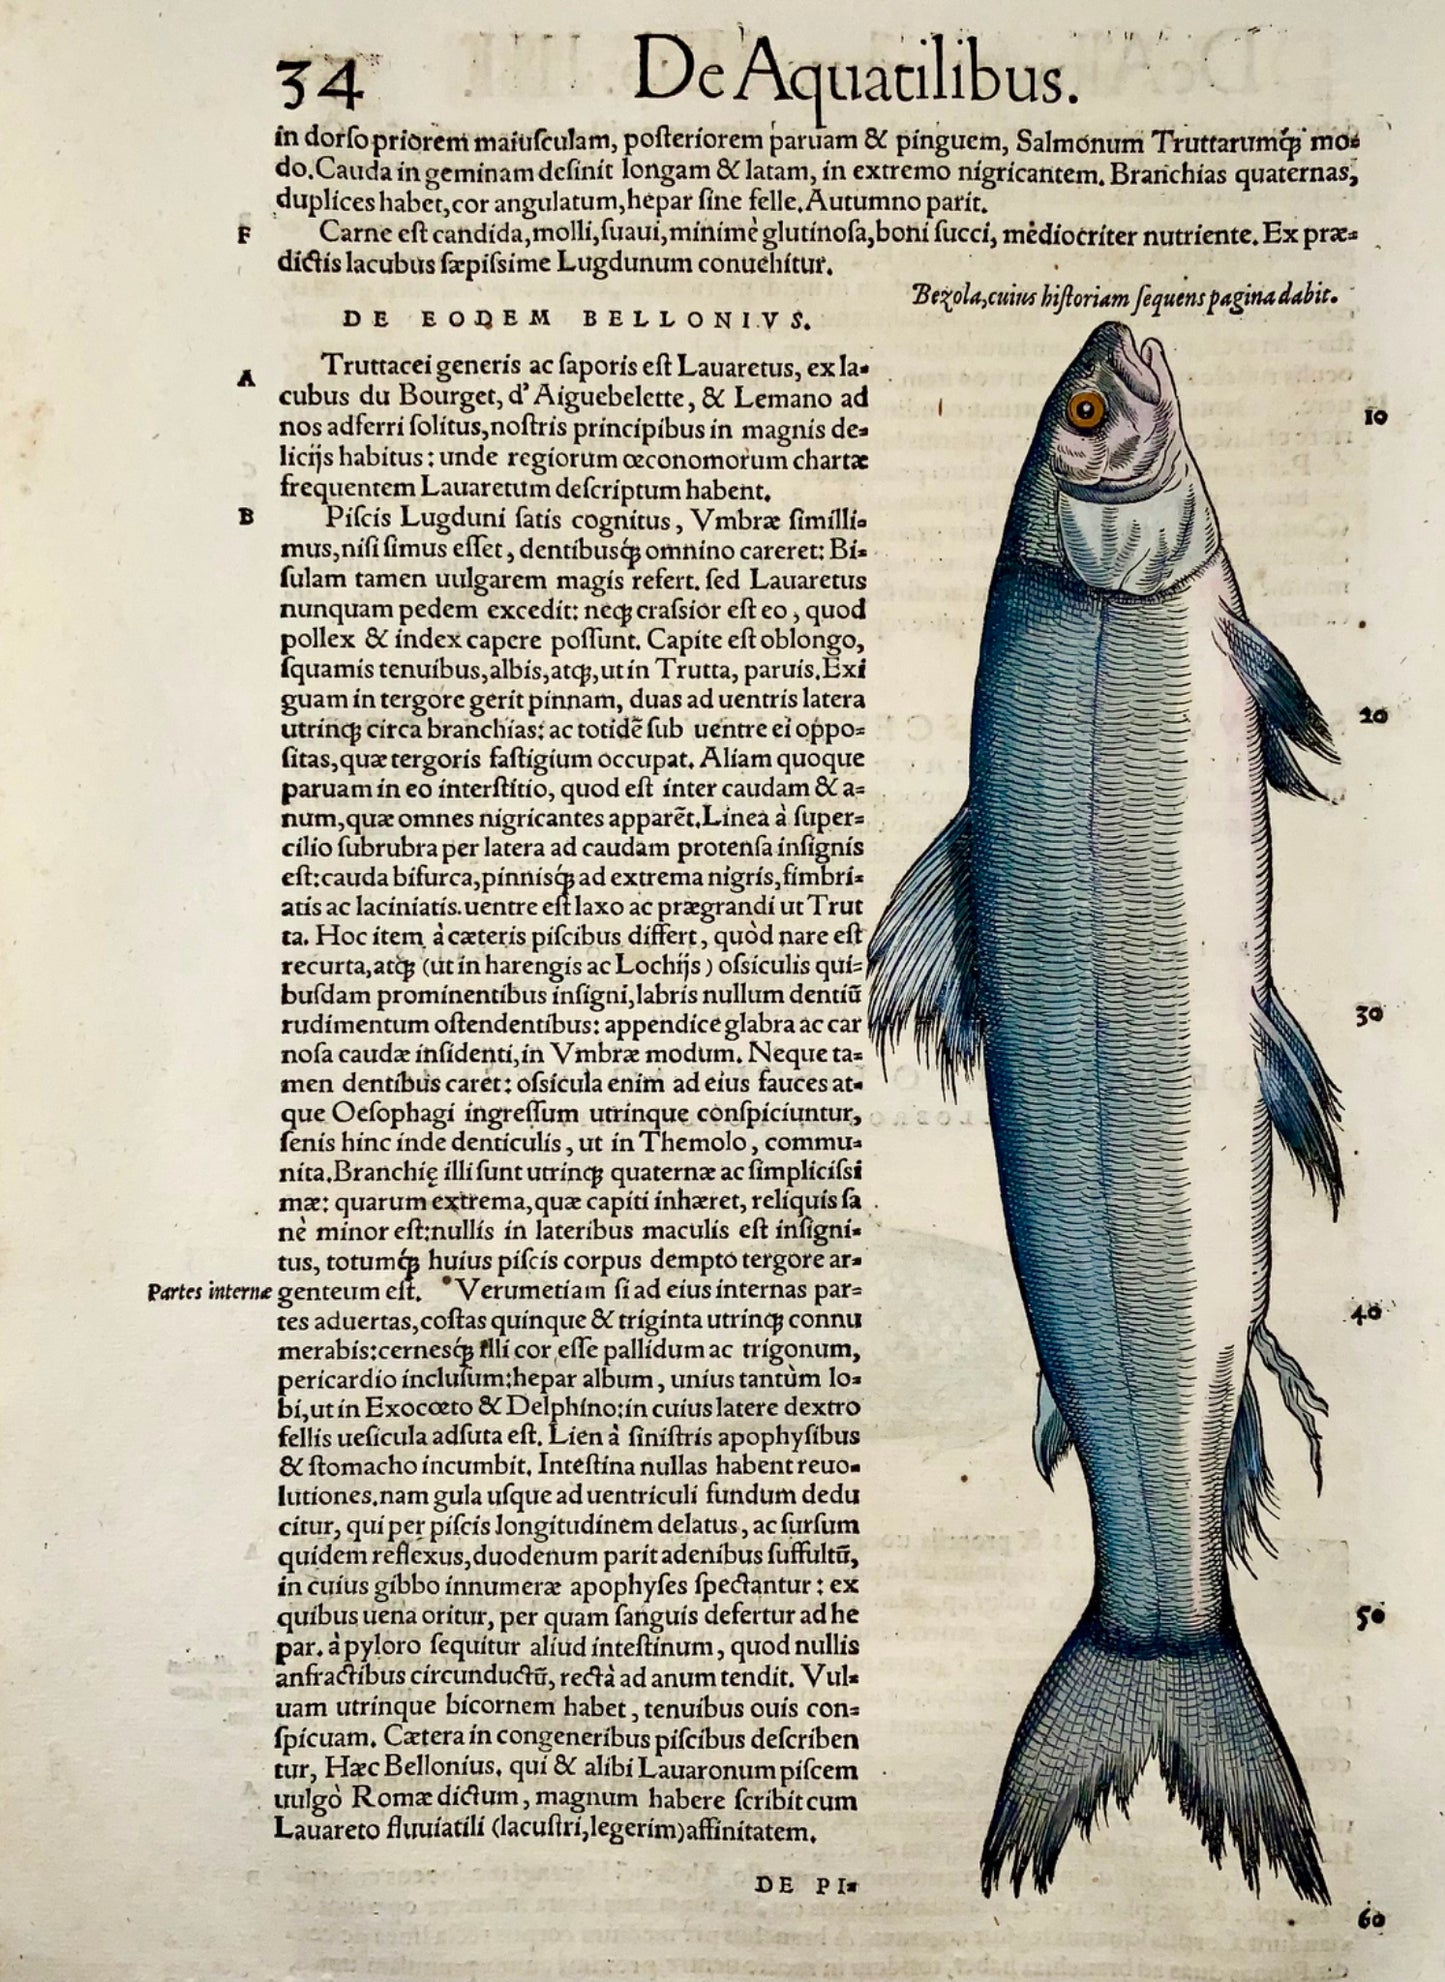 1558 Blue trout, Conrad Gesner, folio woodcut, hand coloured, First State